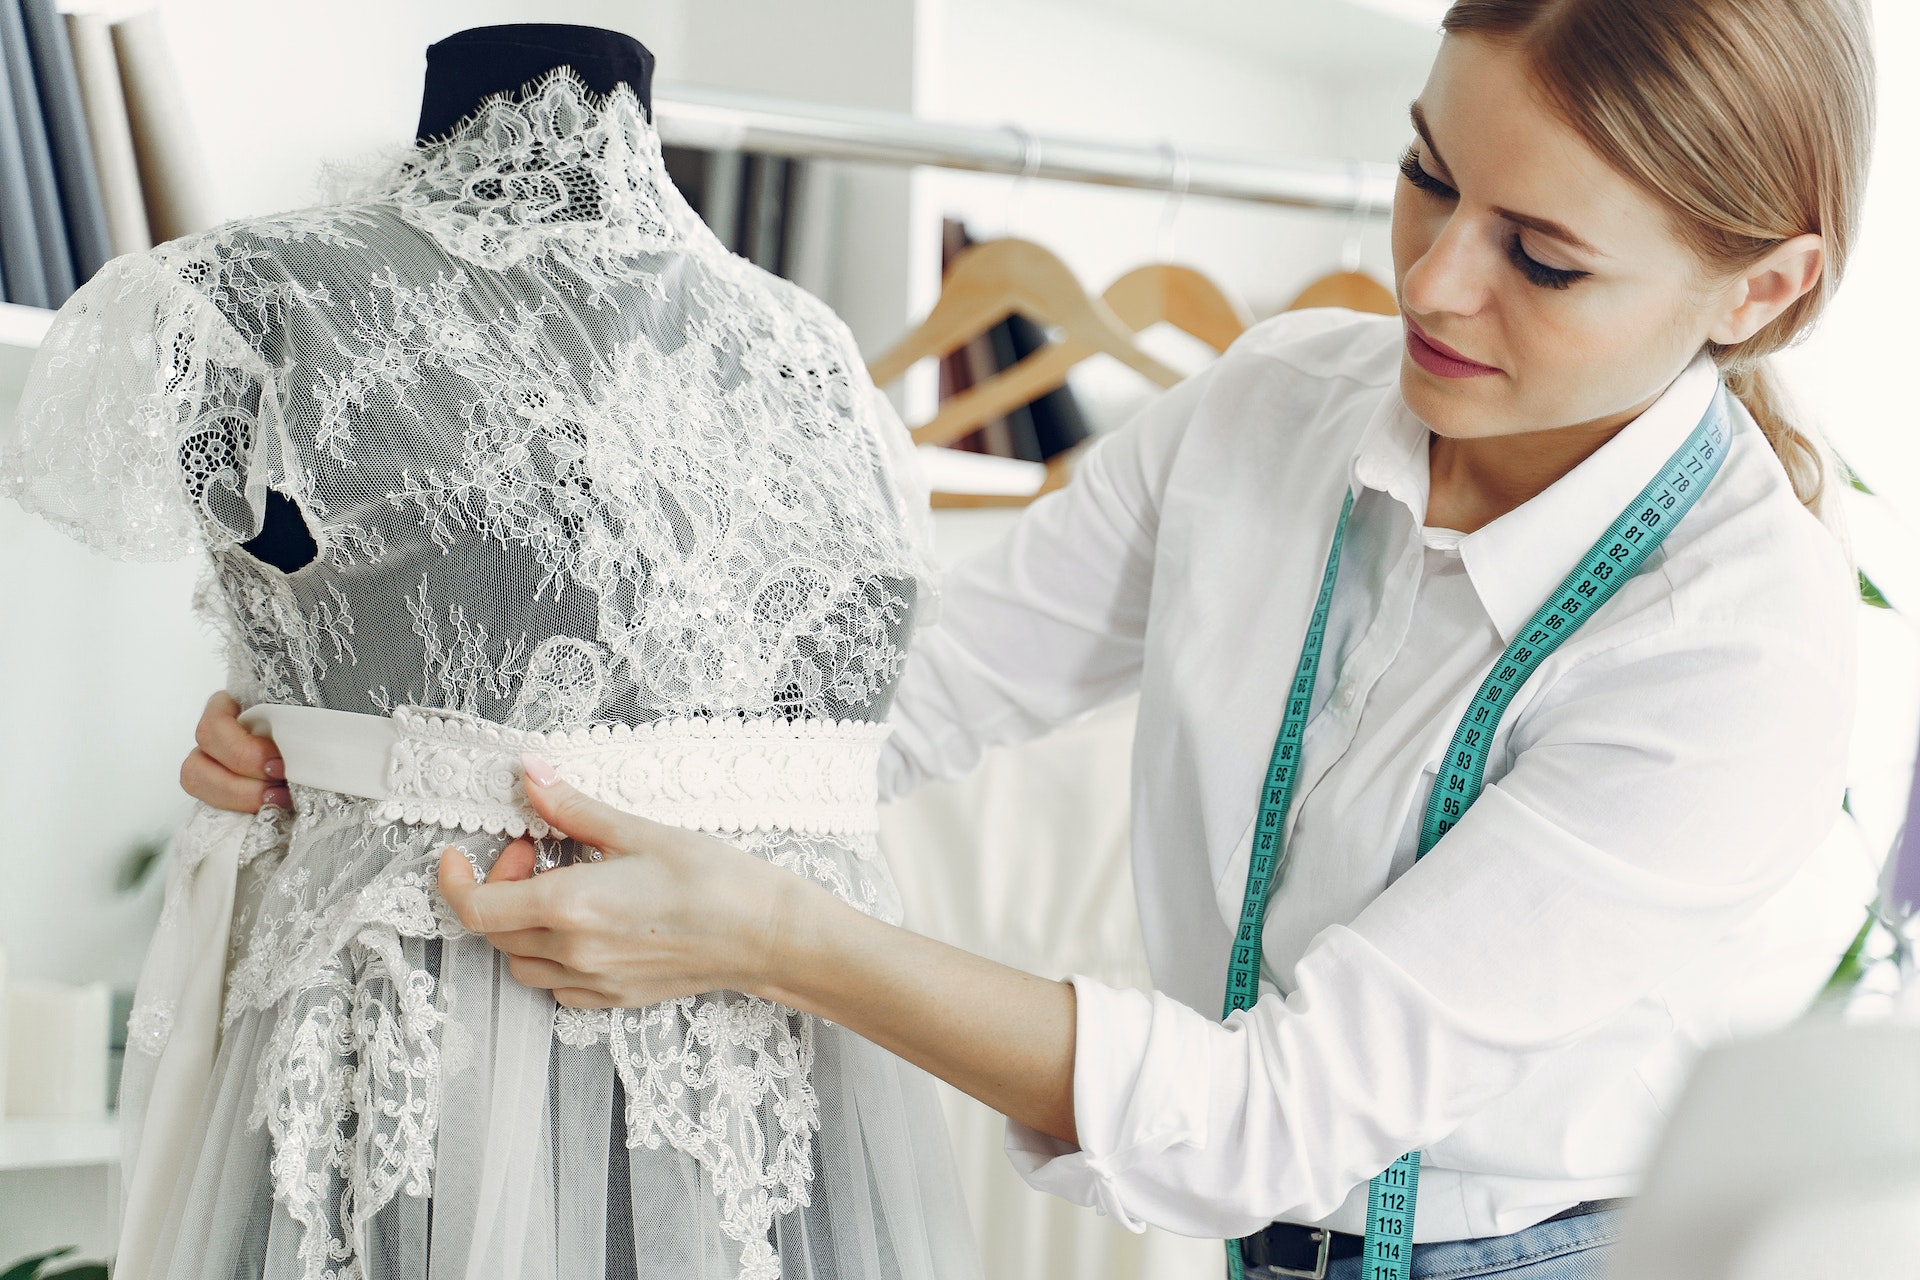 A dressmaker working on a white dress | Source: Pexels